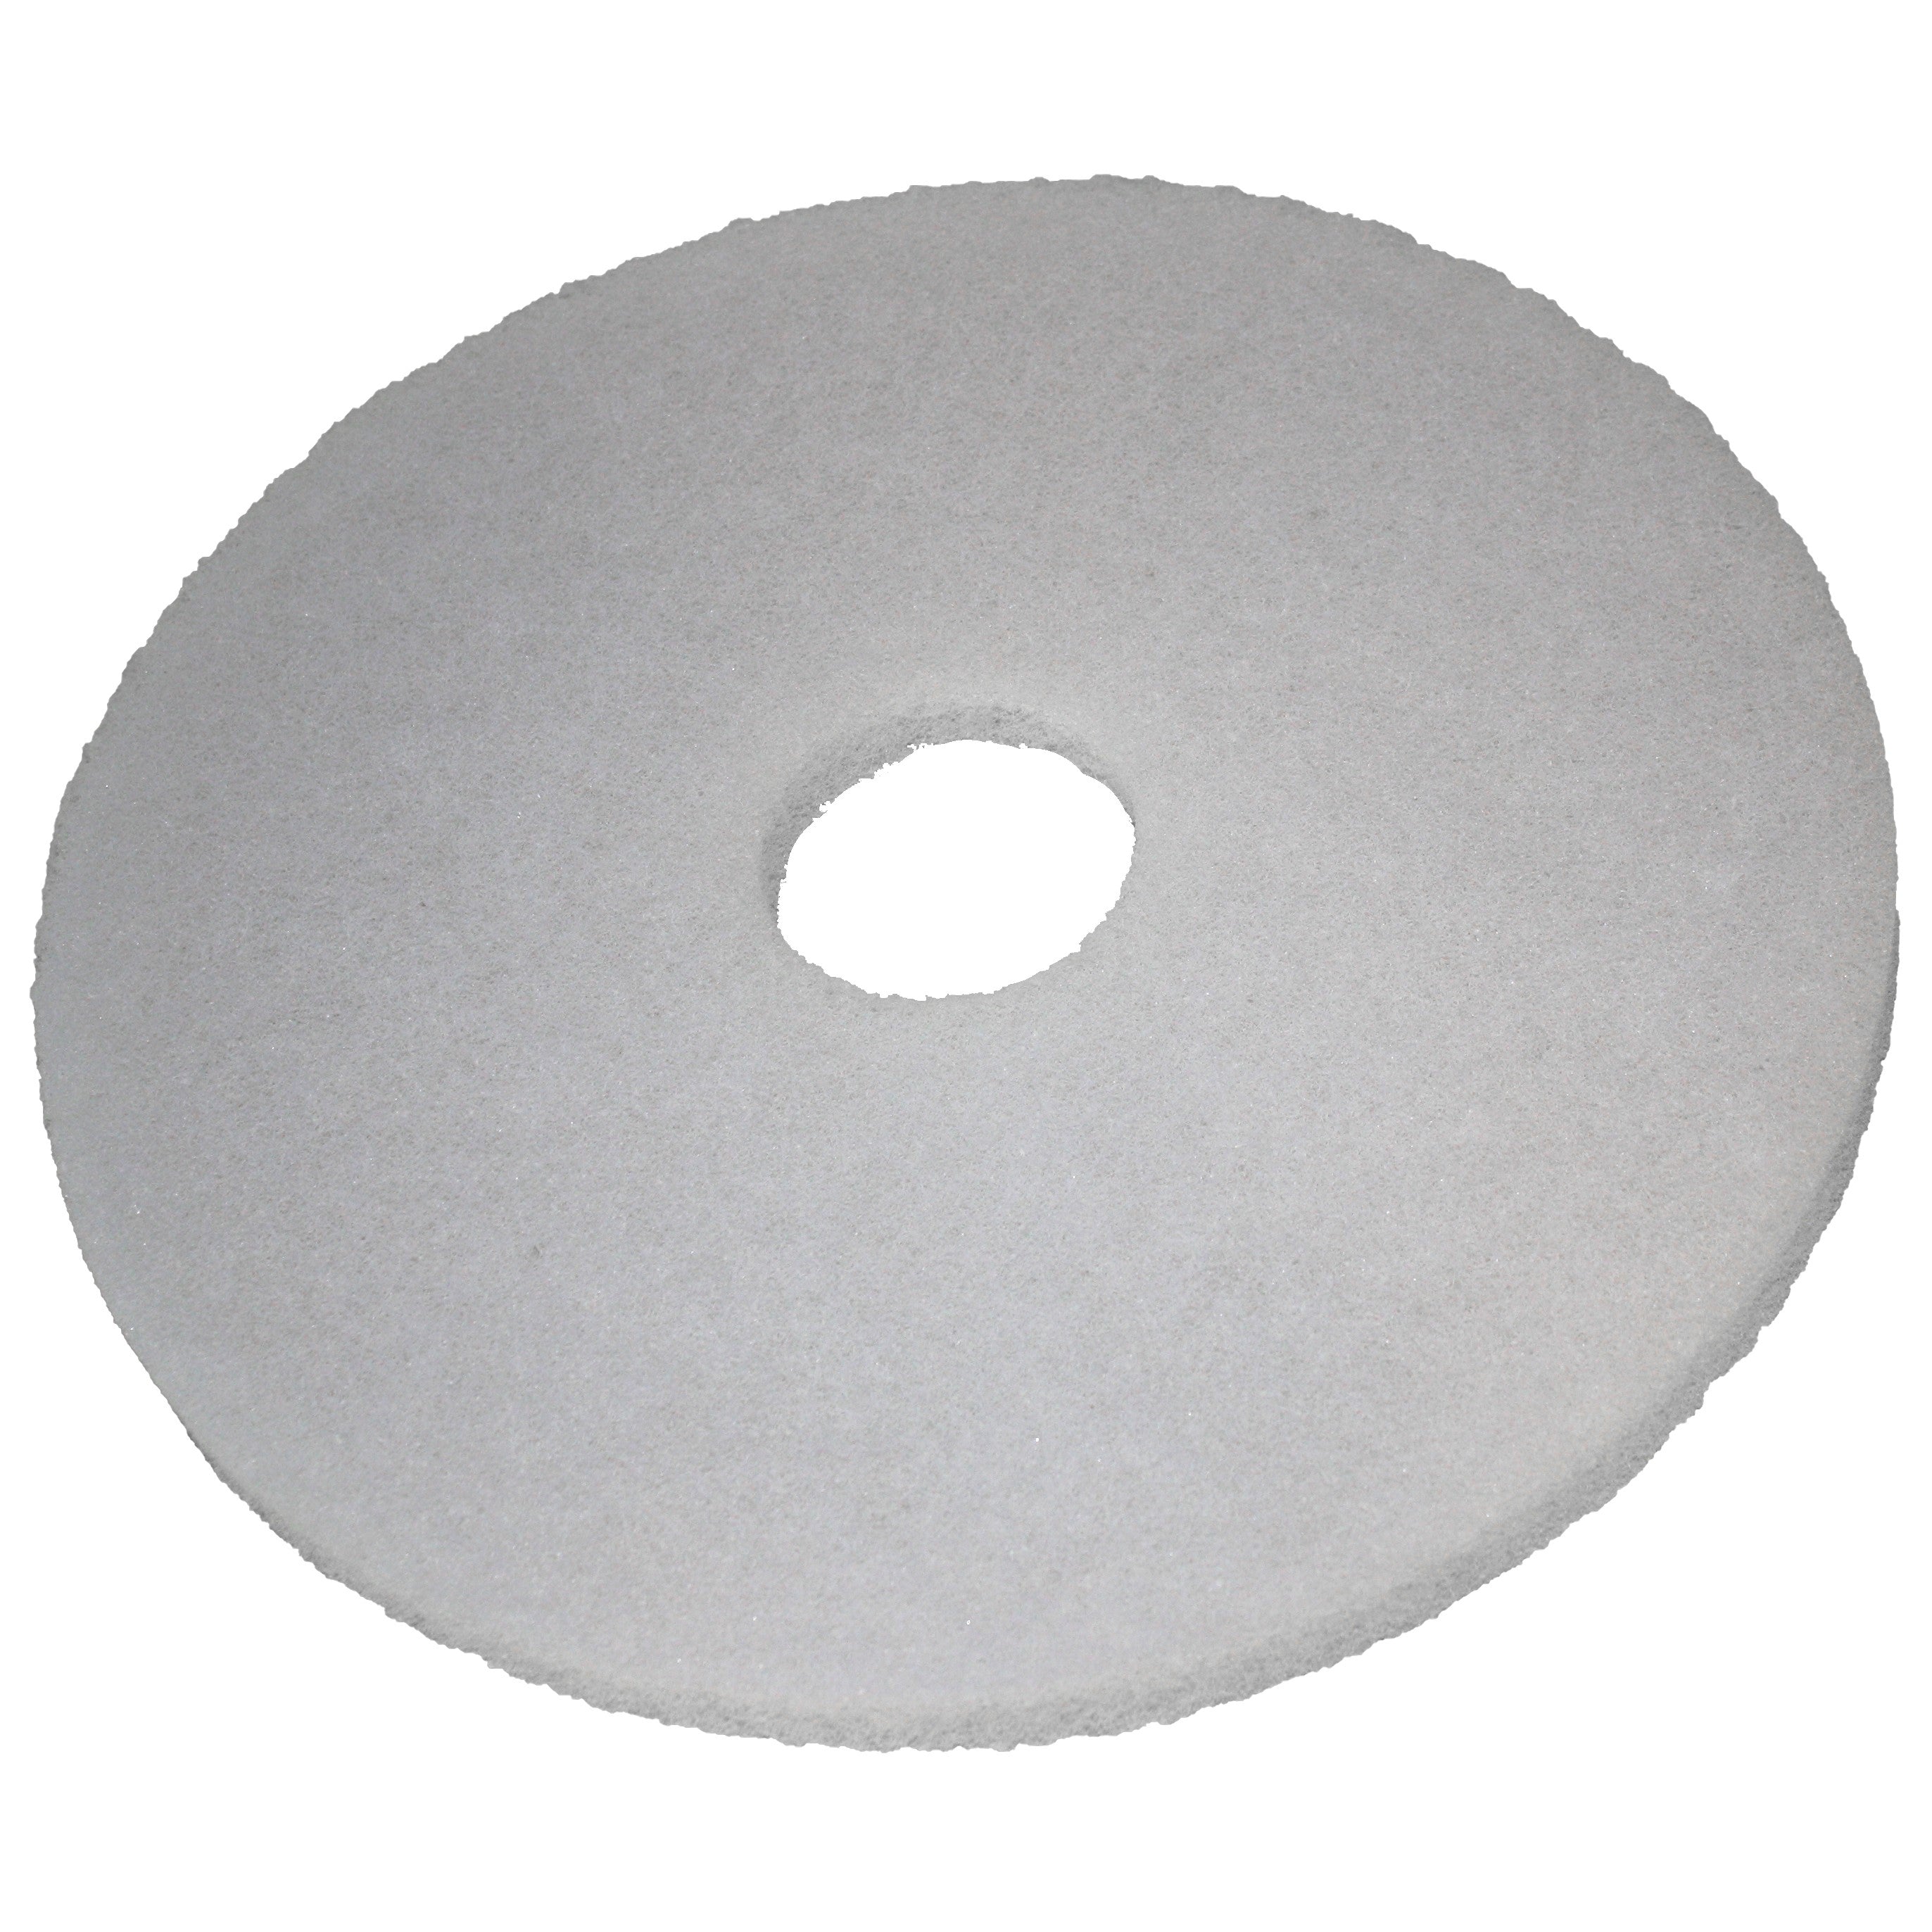 Pad weiss, Ø 165 mm, Polyester